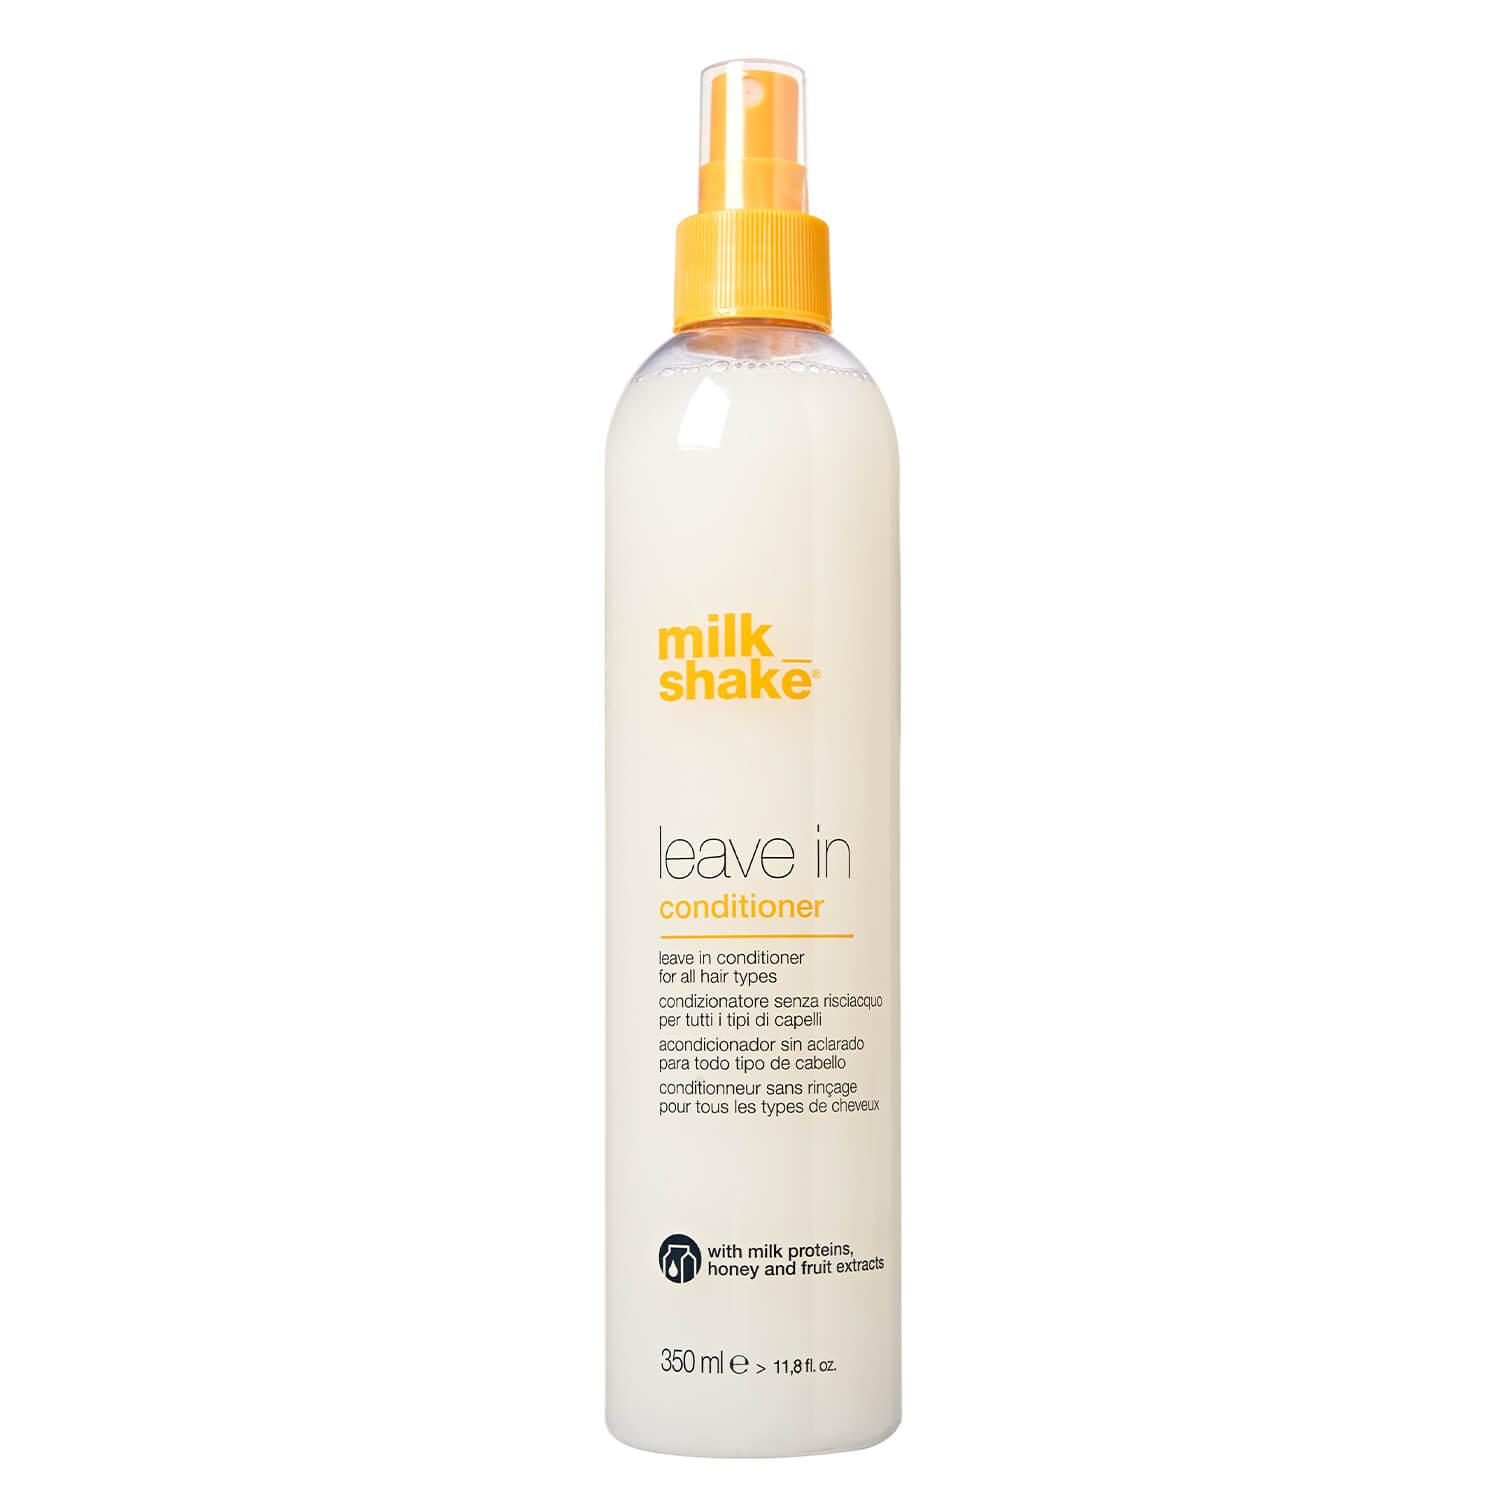 milk_shake leave in treatments - leave-in conditioner